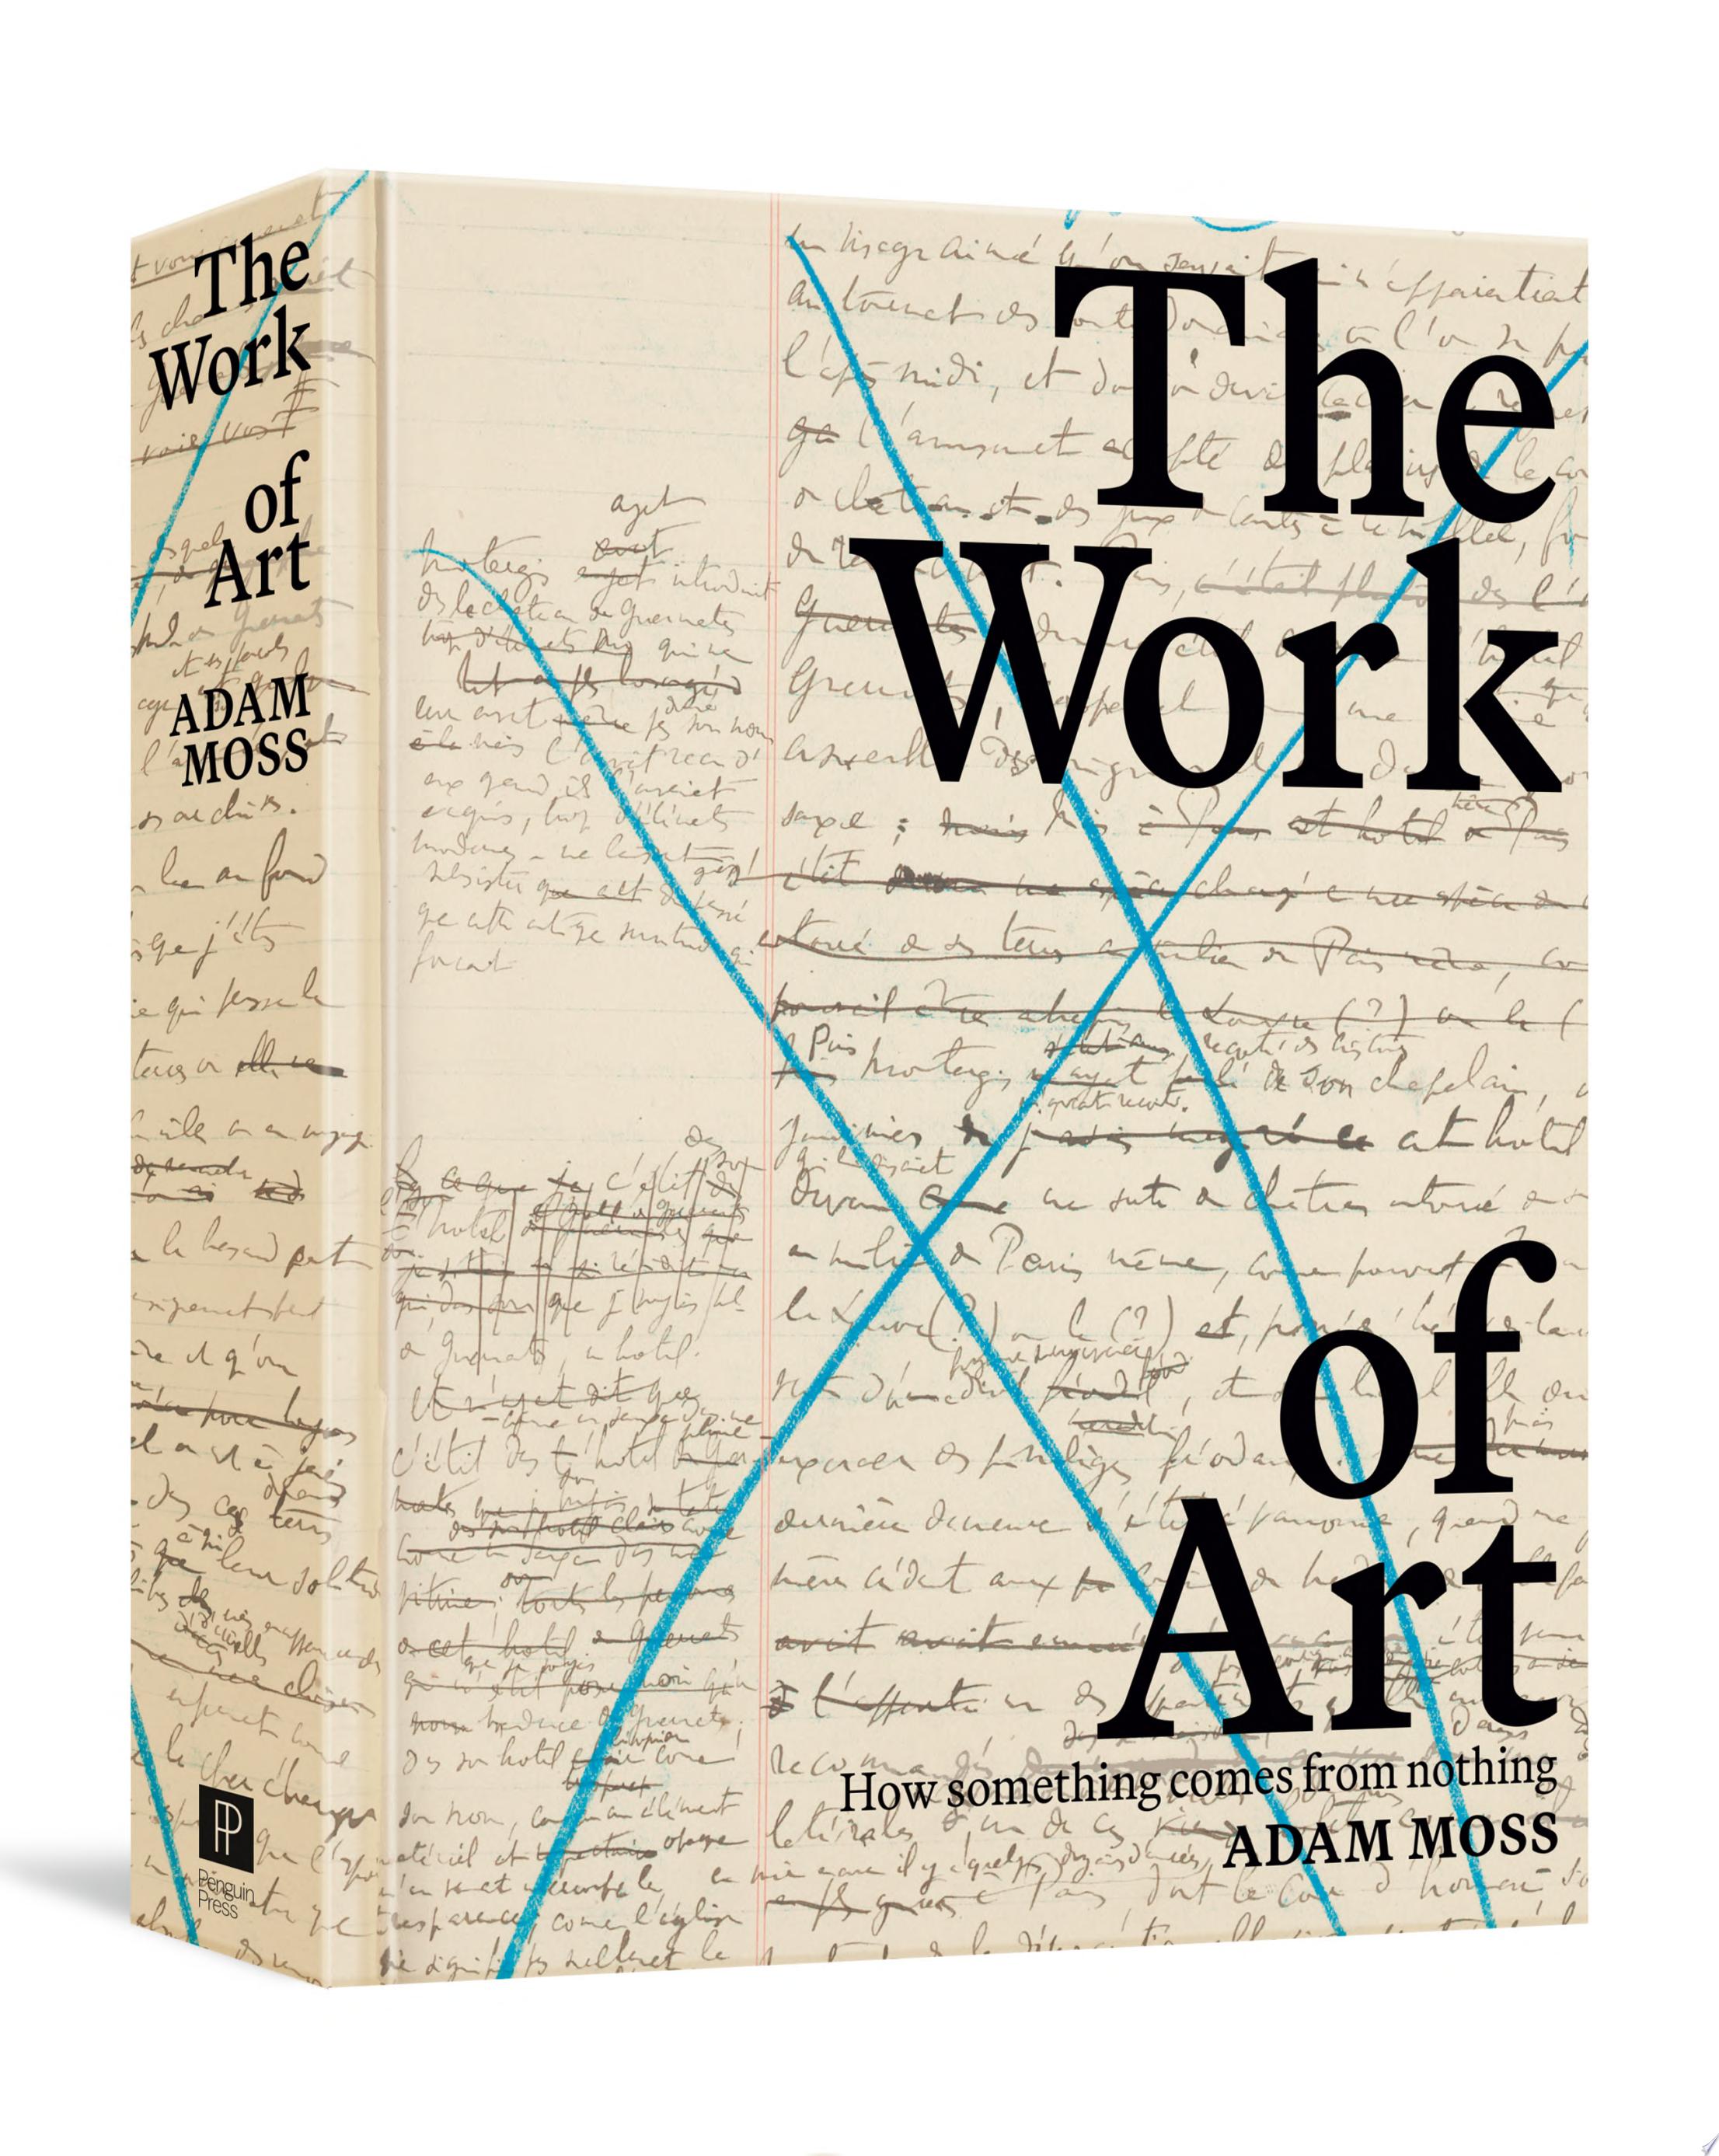 Image for "The Work of Art"